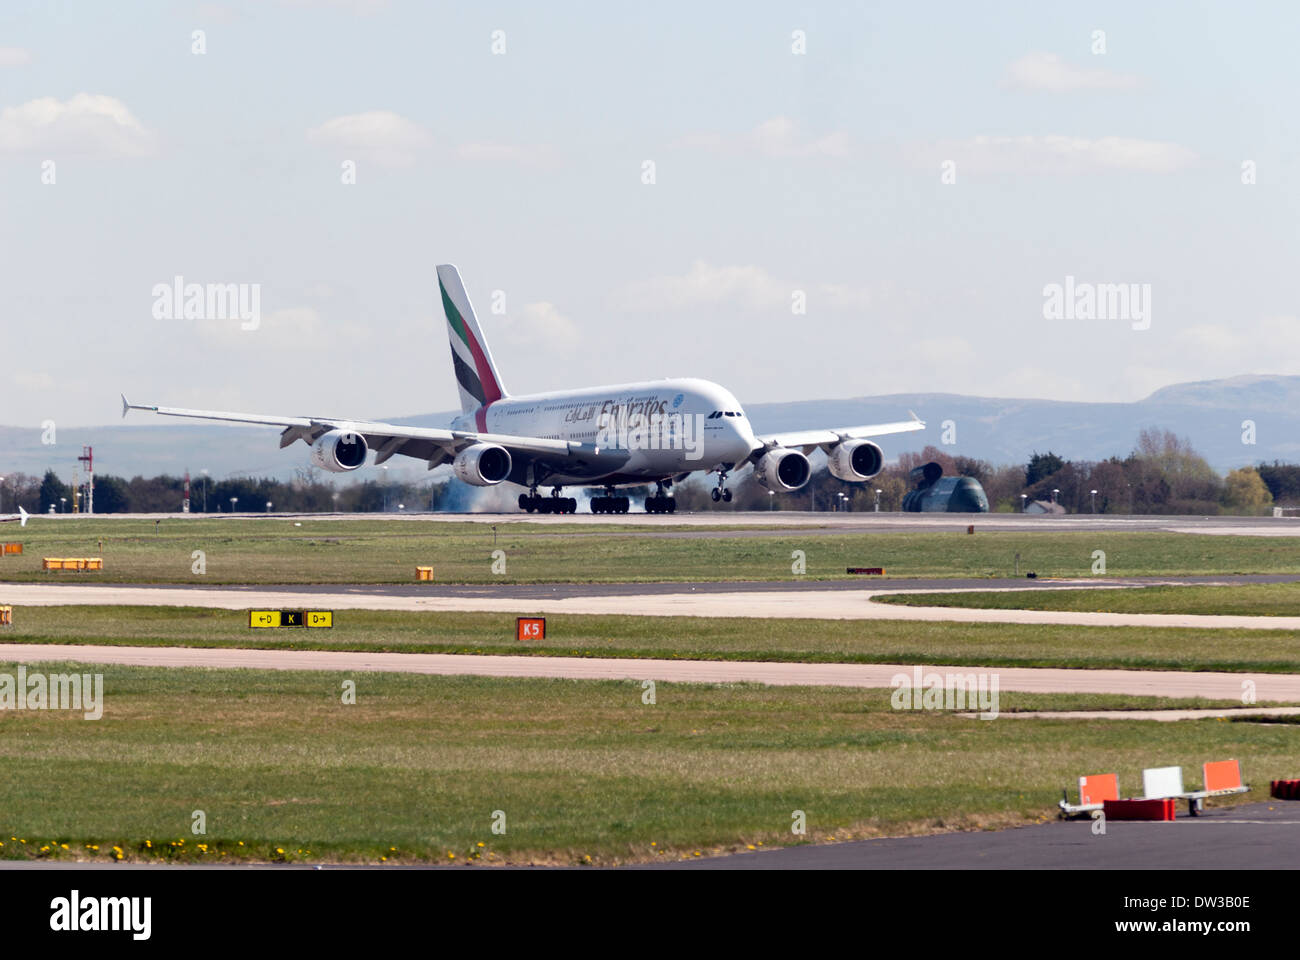 Emirates airlines A380 Airbus landing at Manchester Airport, England, UK Stock Photo